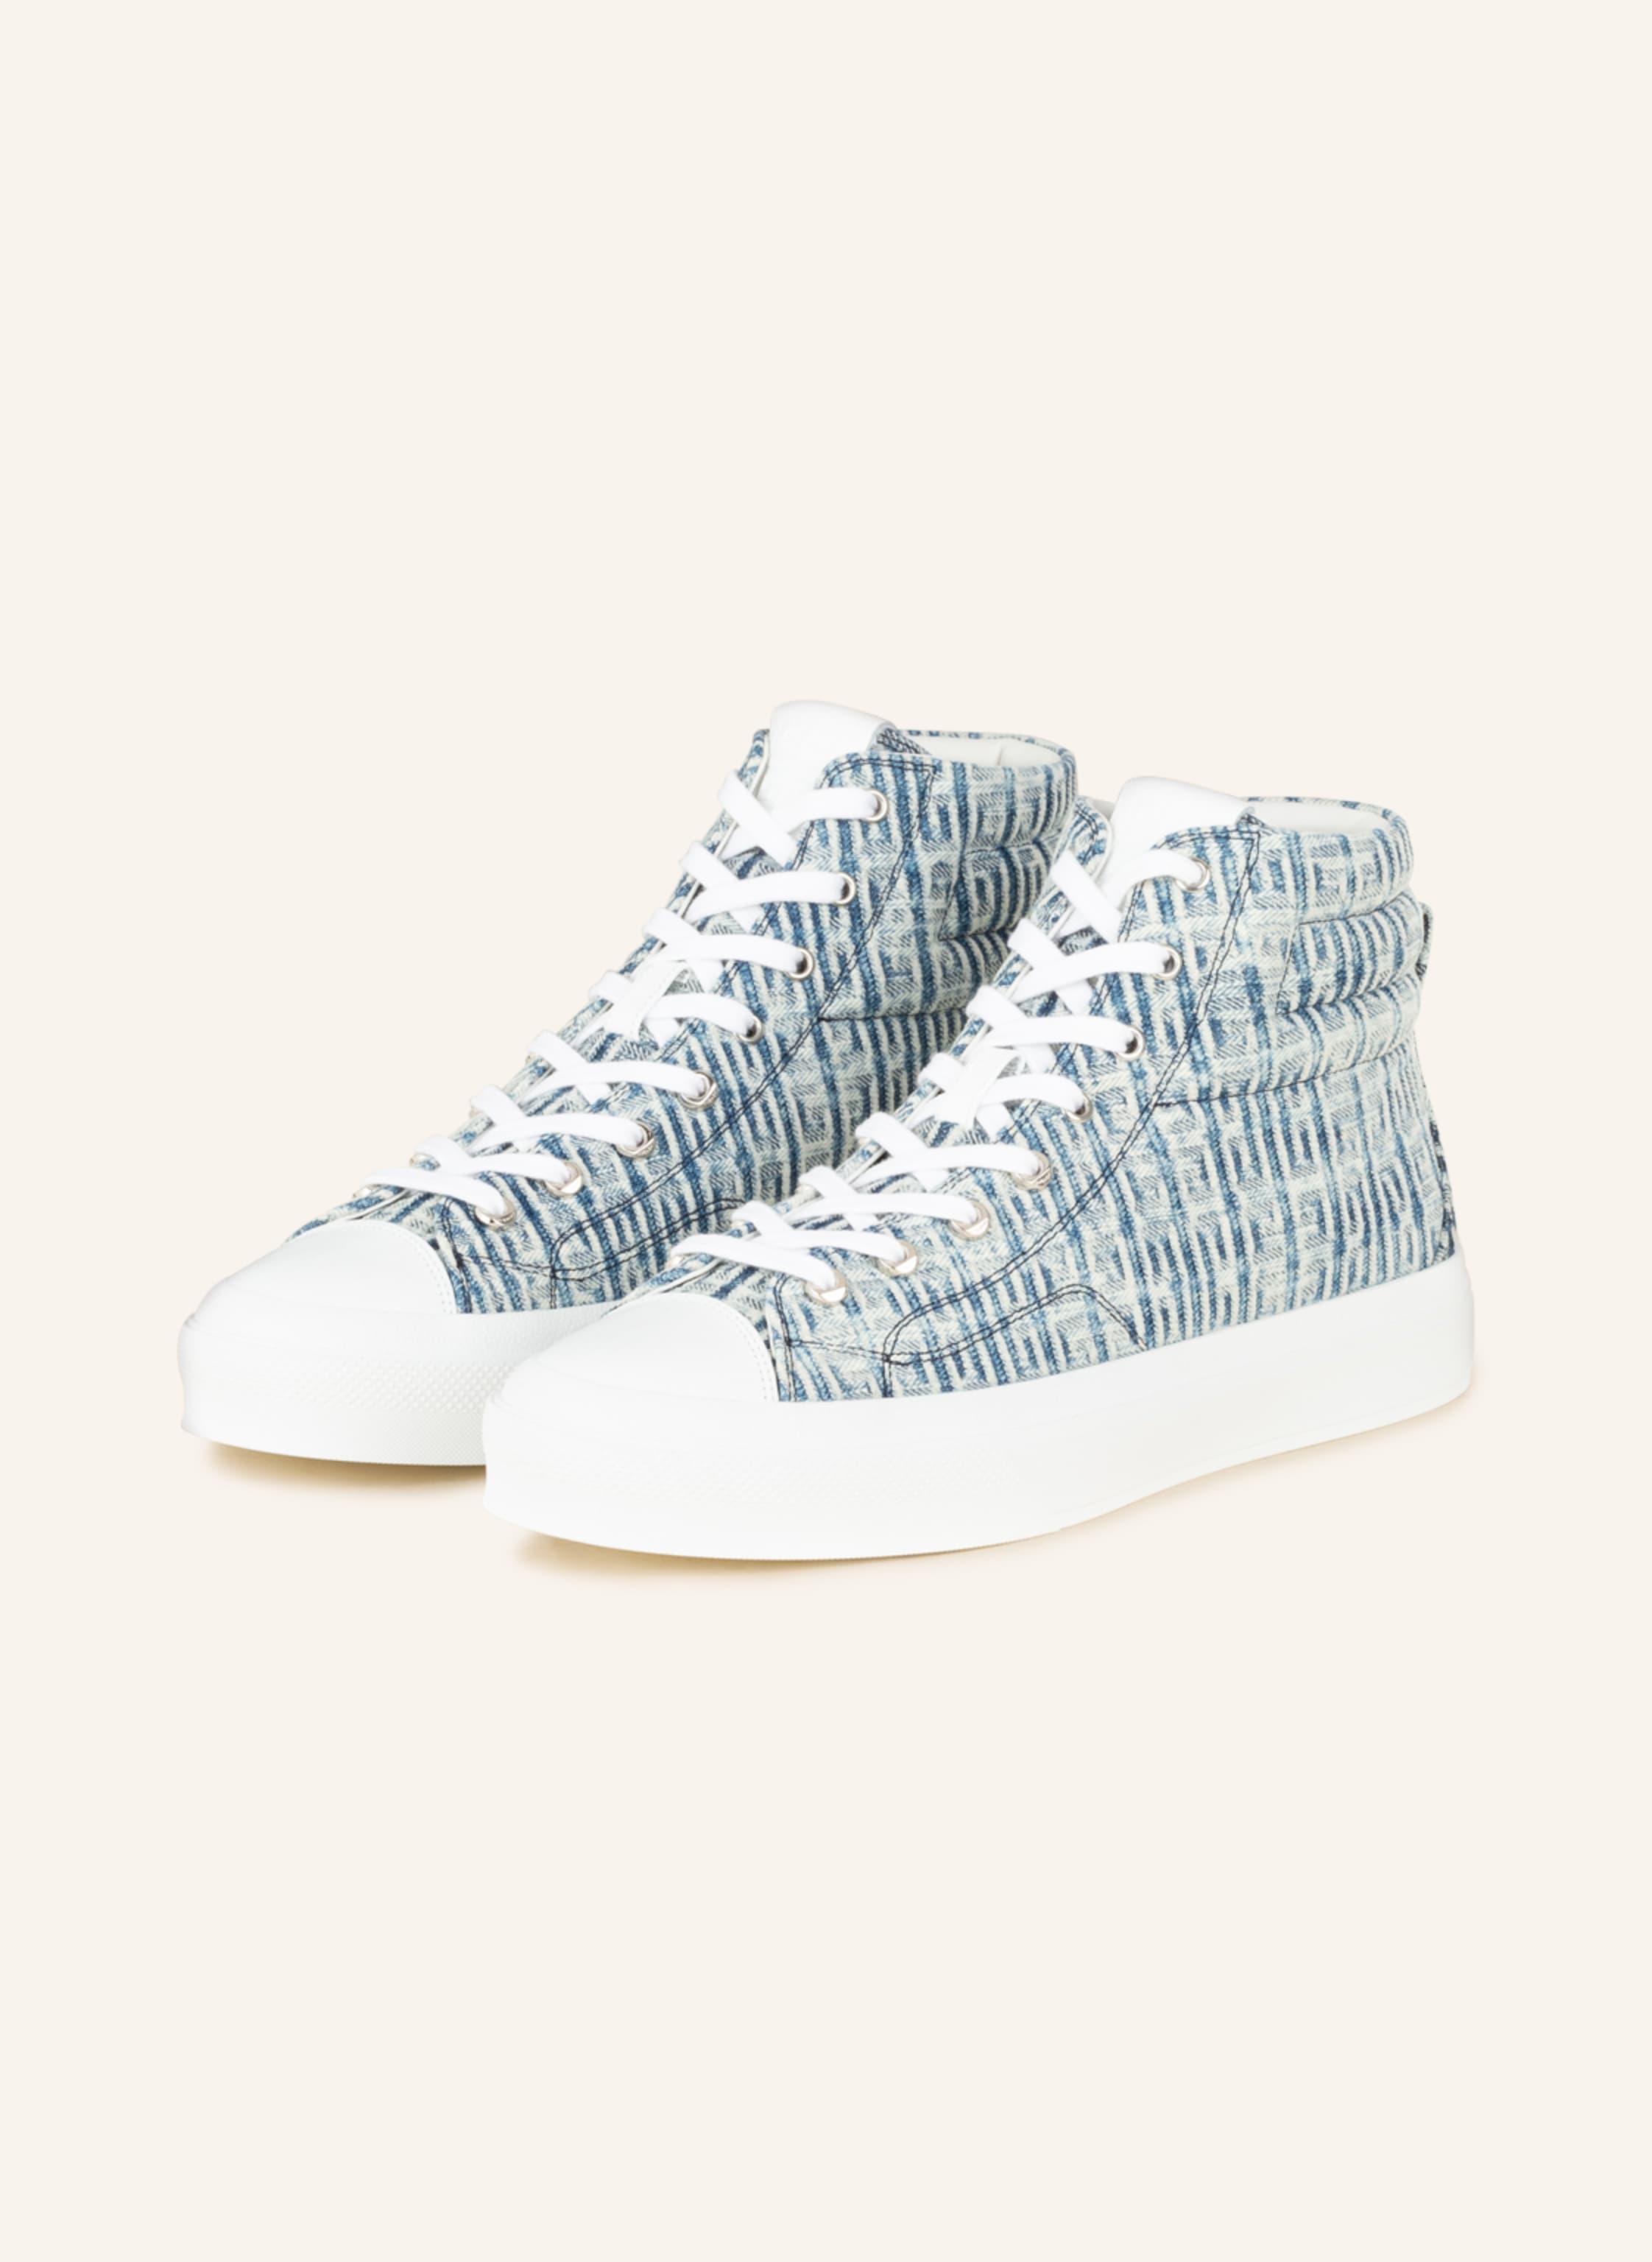 GIVENCHY High-top sneakers CITY in blue | Breuninger